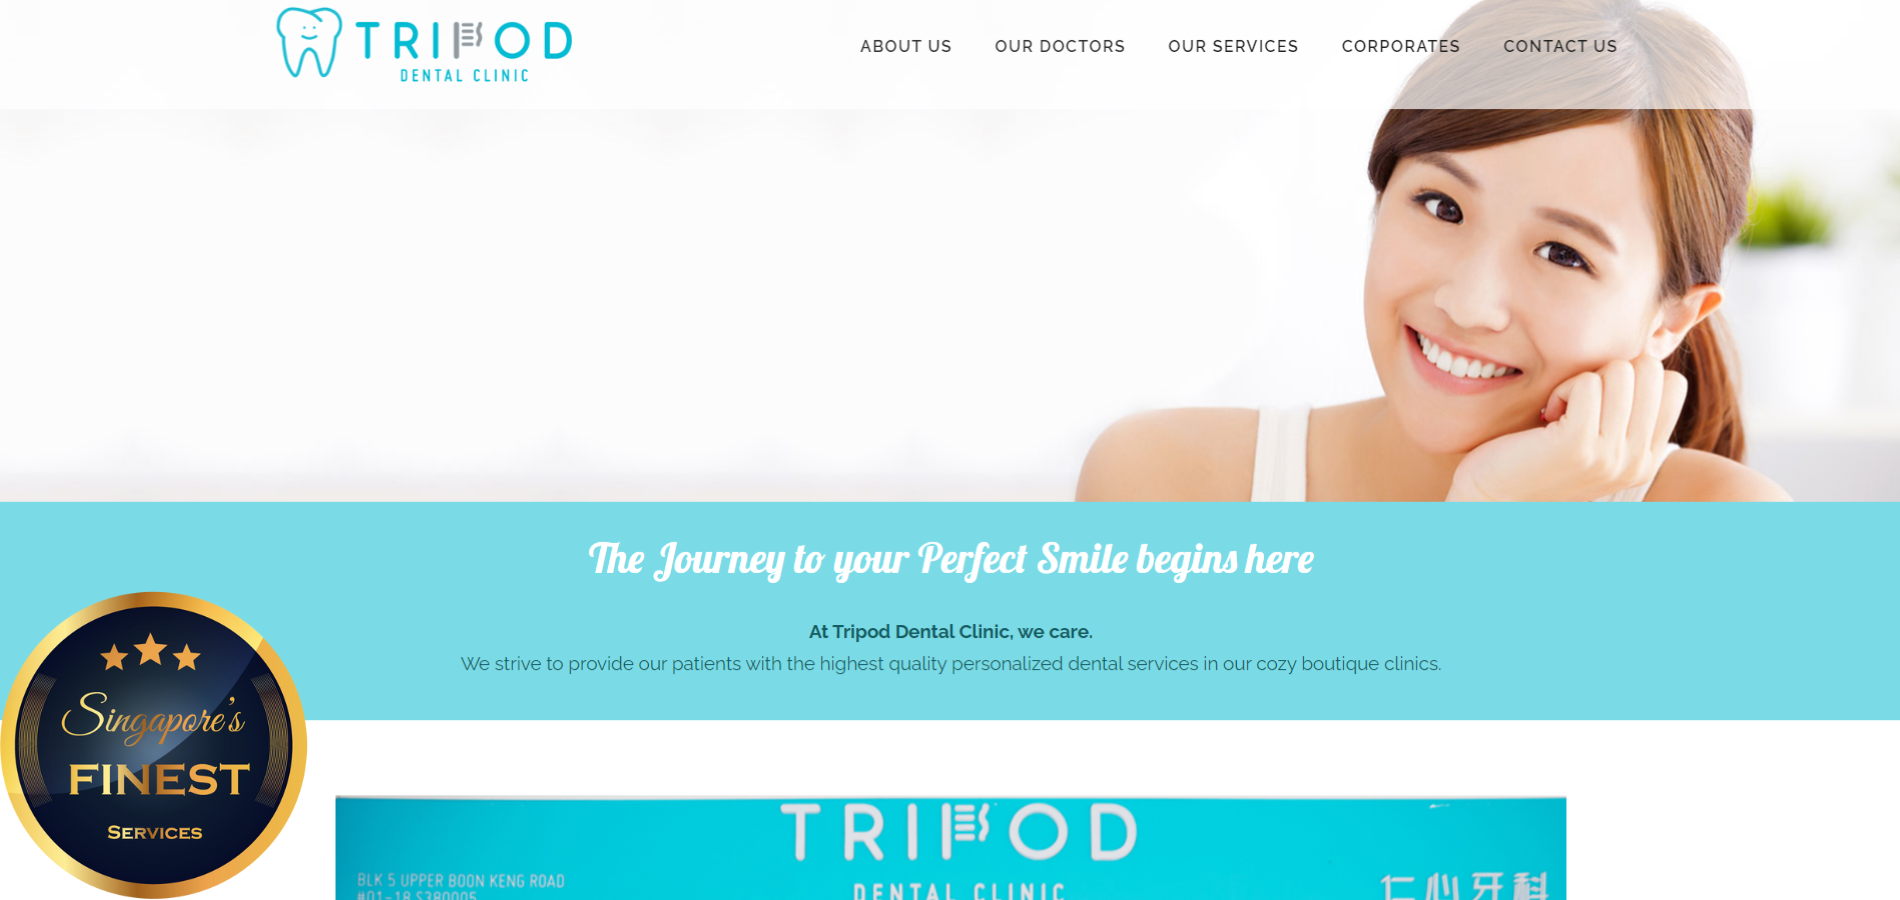 The Finest Dental Clinics in Boon Keng Singapore